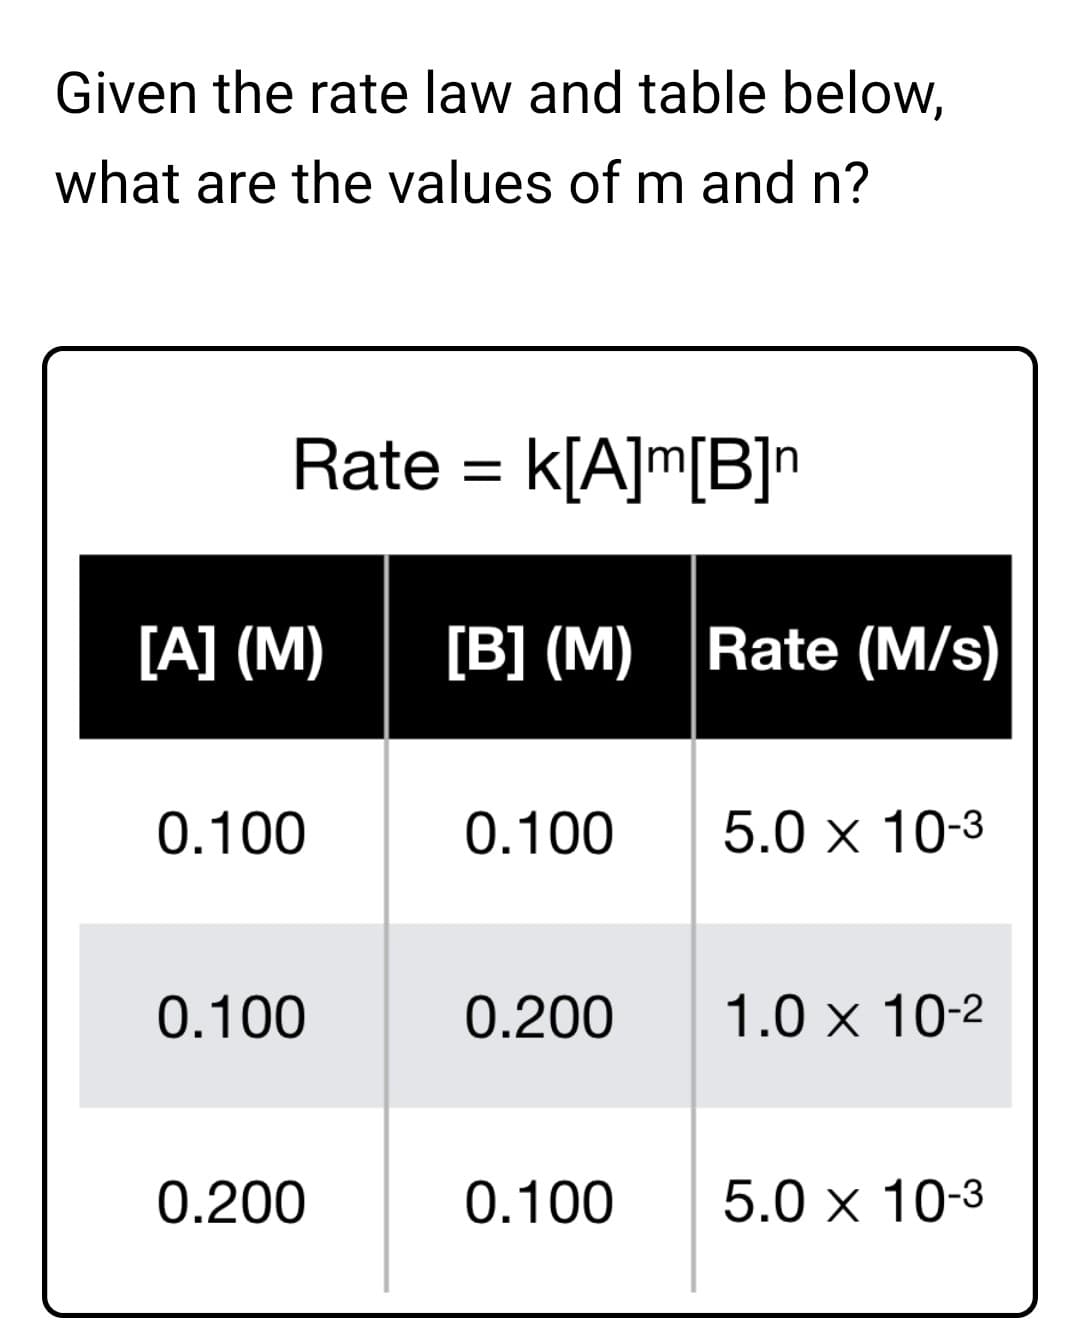 Given the rate law and table below,
what are the values of m and n?
Rate = k[A]m[B]n
[A] (M)
[B] (M) Rate (M/s)
0.100
0.100
5.0 x 10-3
0.100
0.200
1.0 x 10-2
0.200
0.100
5.0 x 10-3
